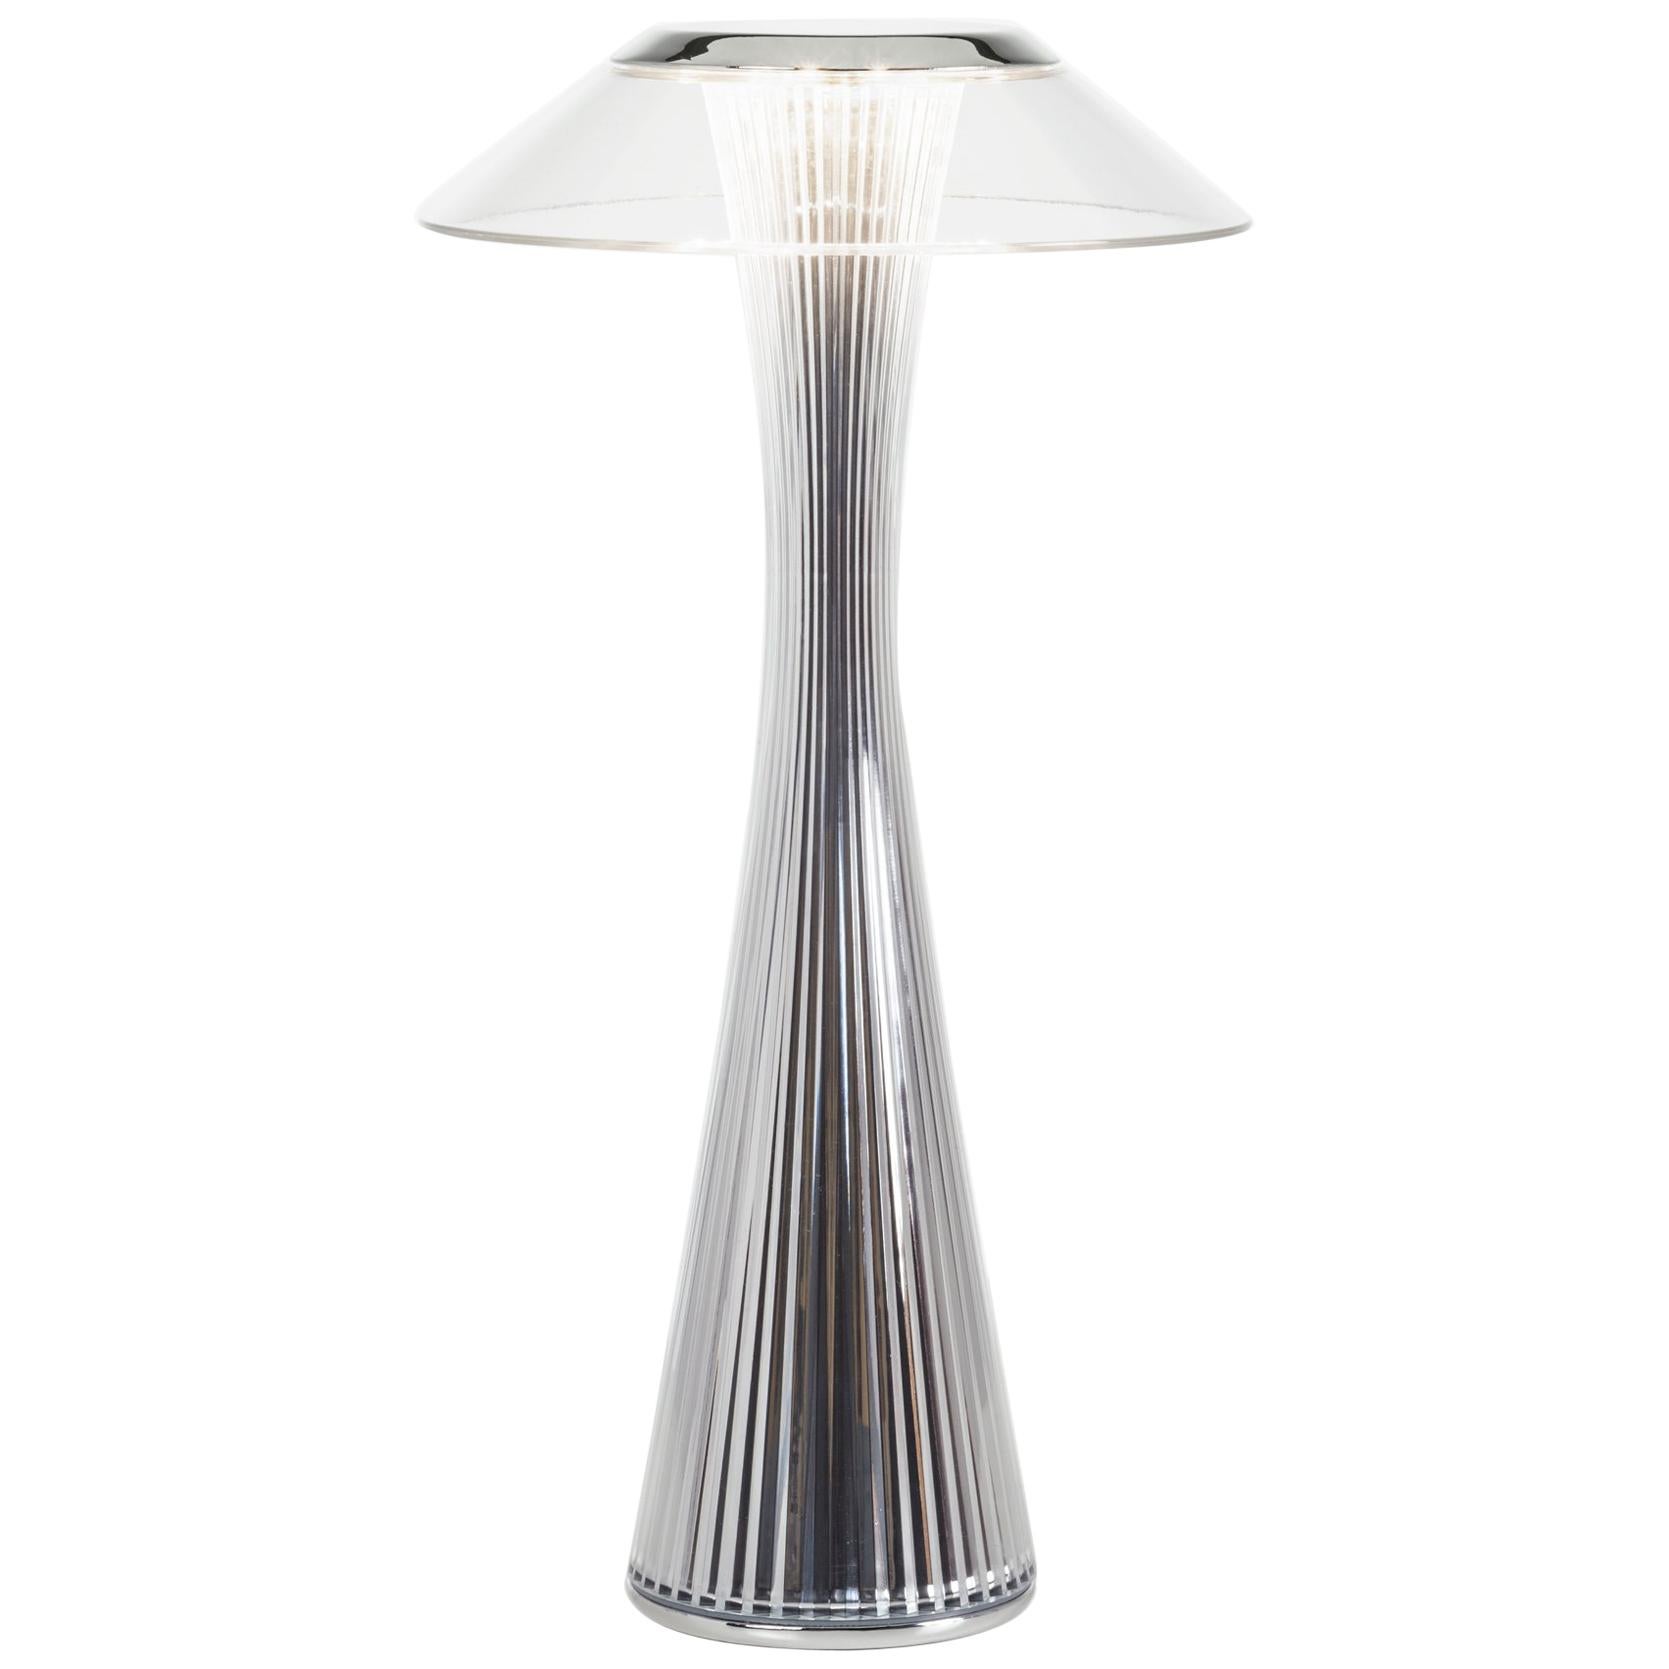 Kartell Outdoor Space Lamp in Chrome by Adam Tihany